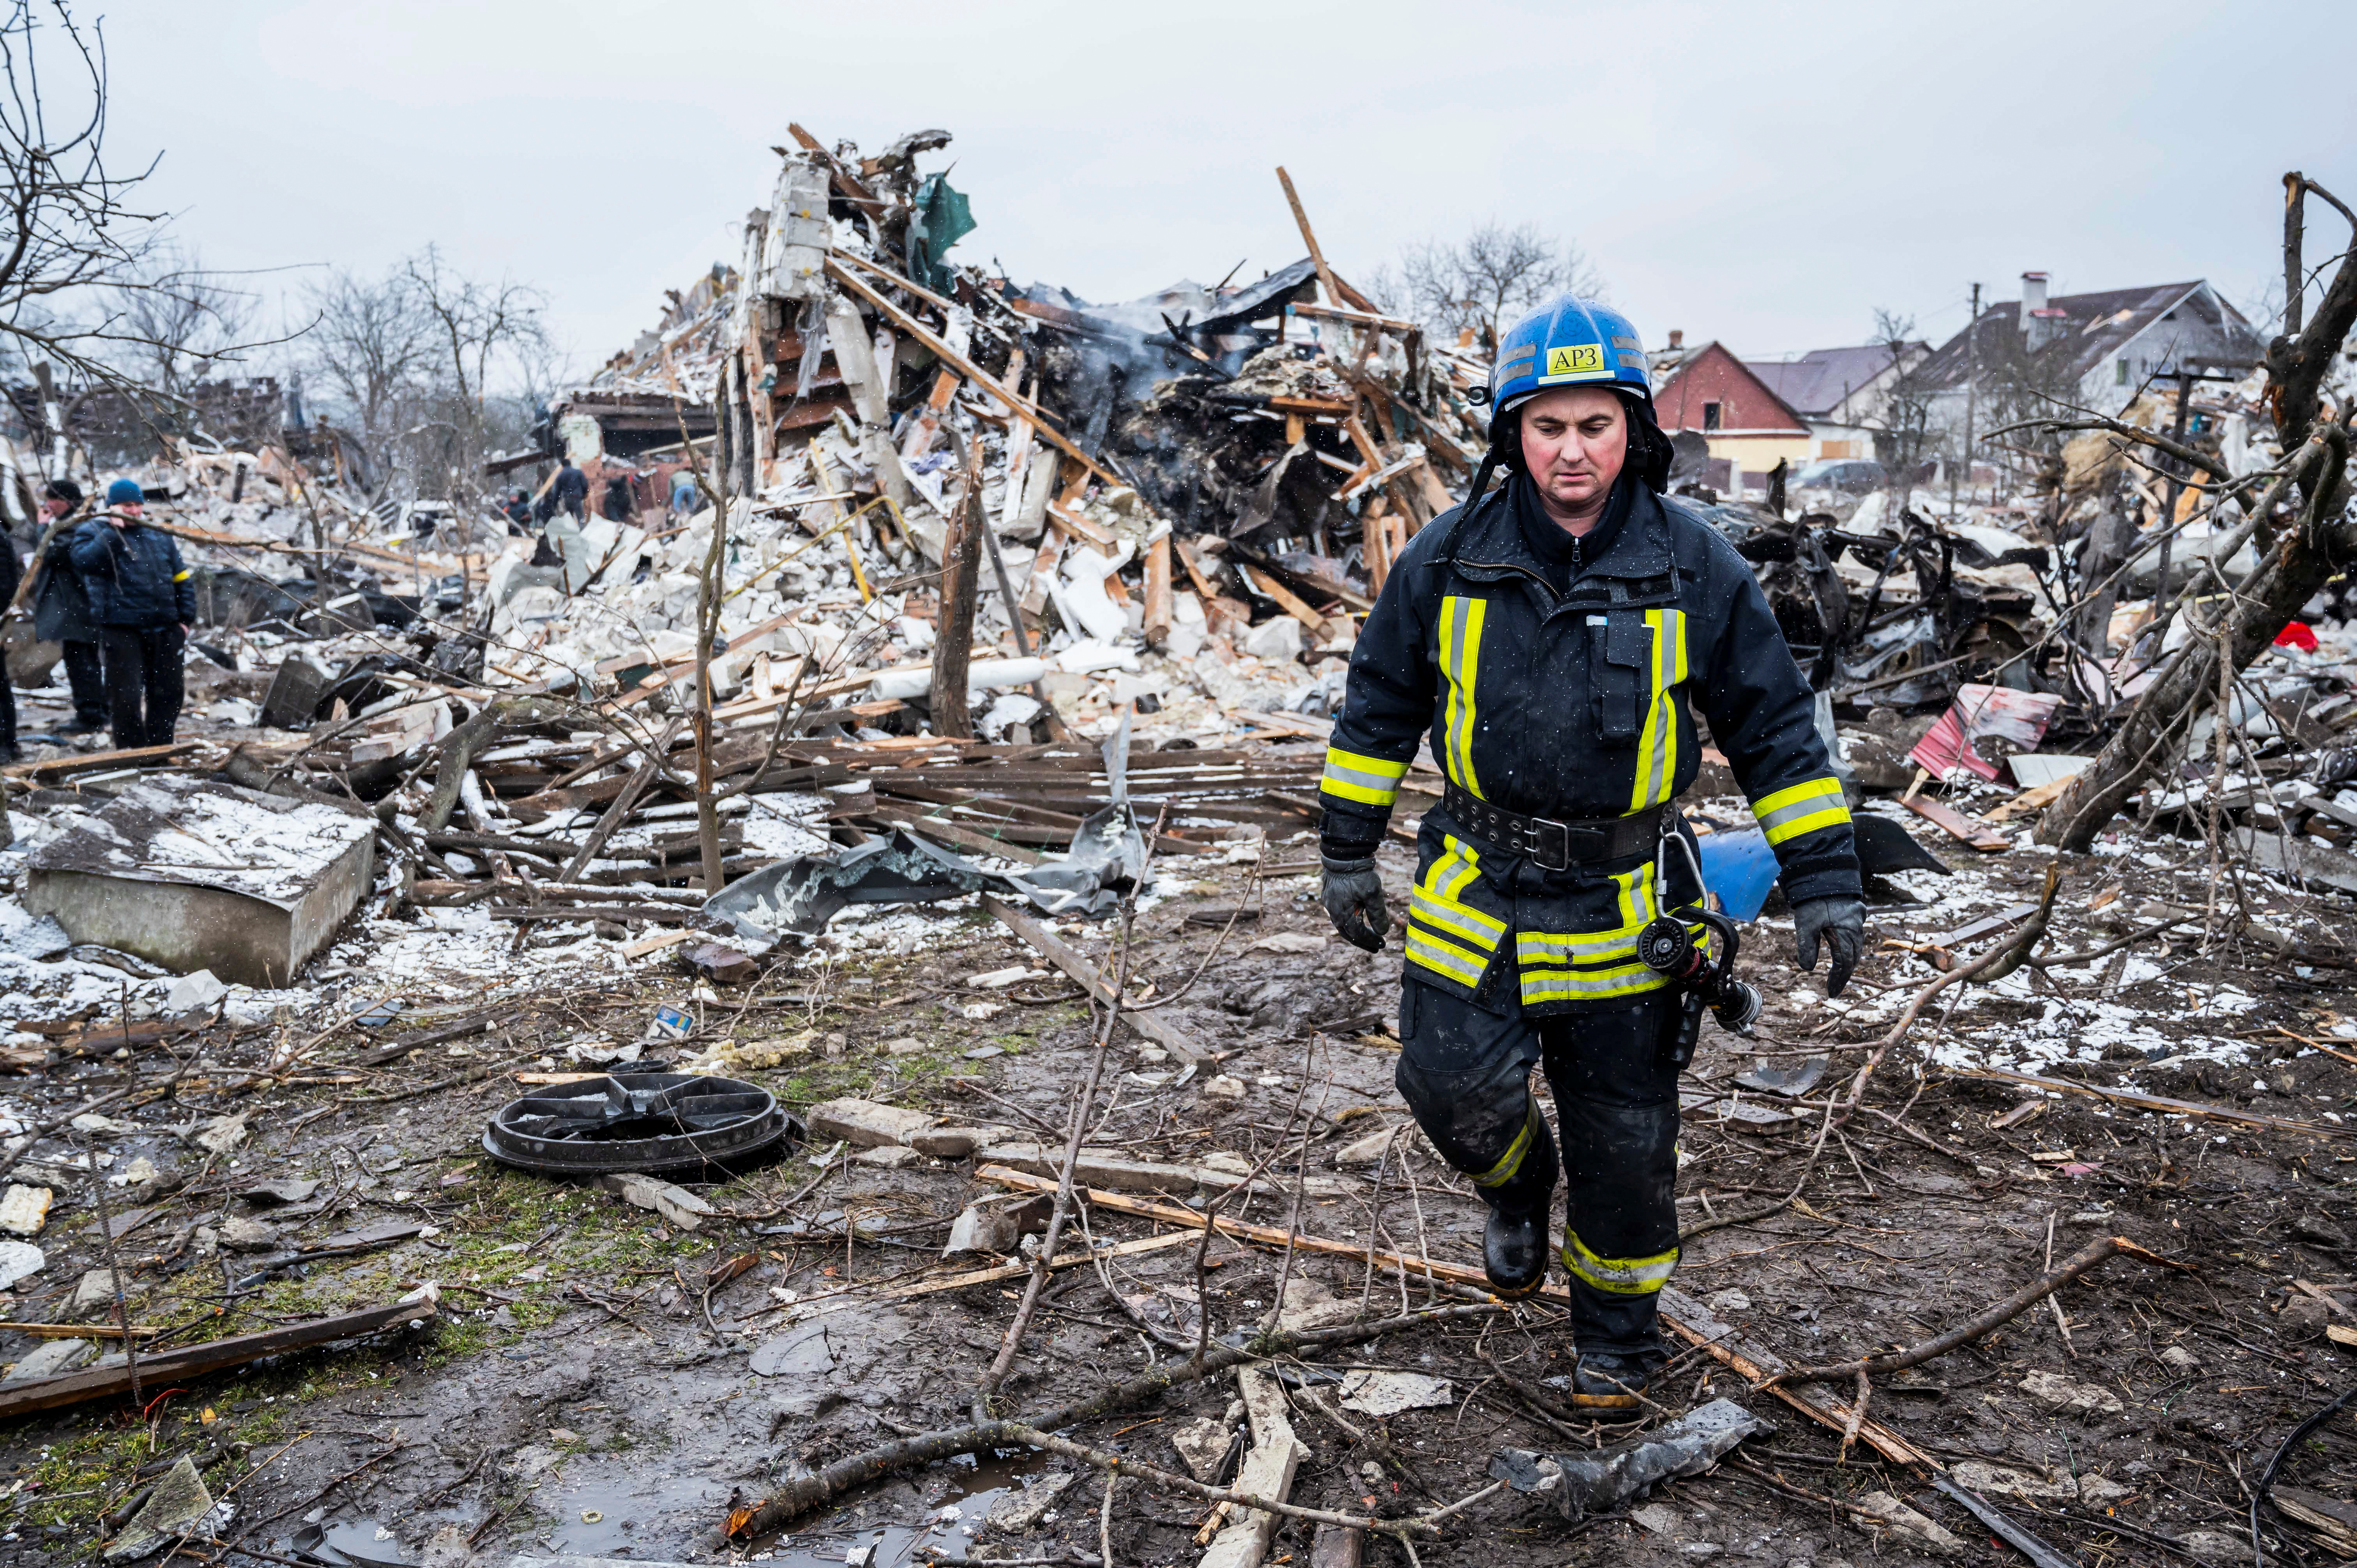 A rescuer walks among debris of residential buildings destroyed by shelling, as Russia's invasion of Ukraine continues, in Zhytomyr